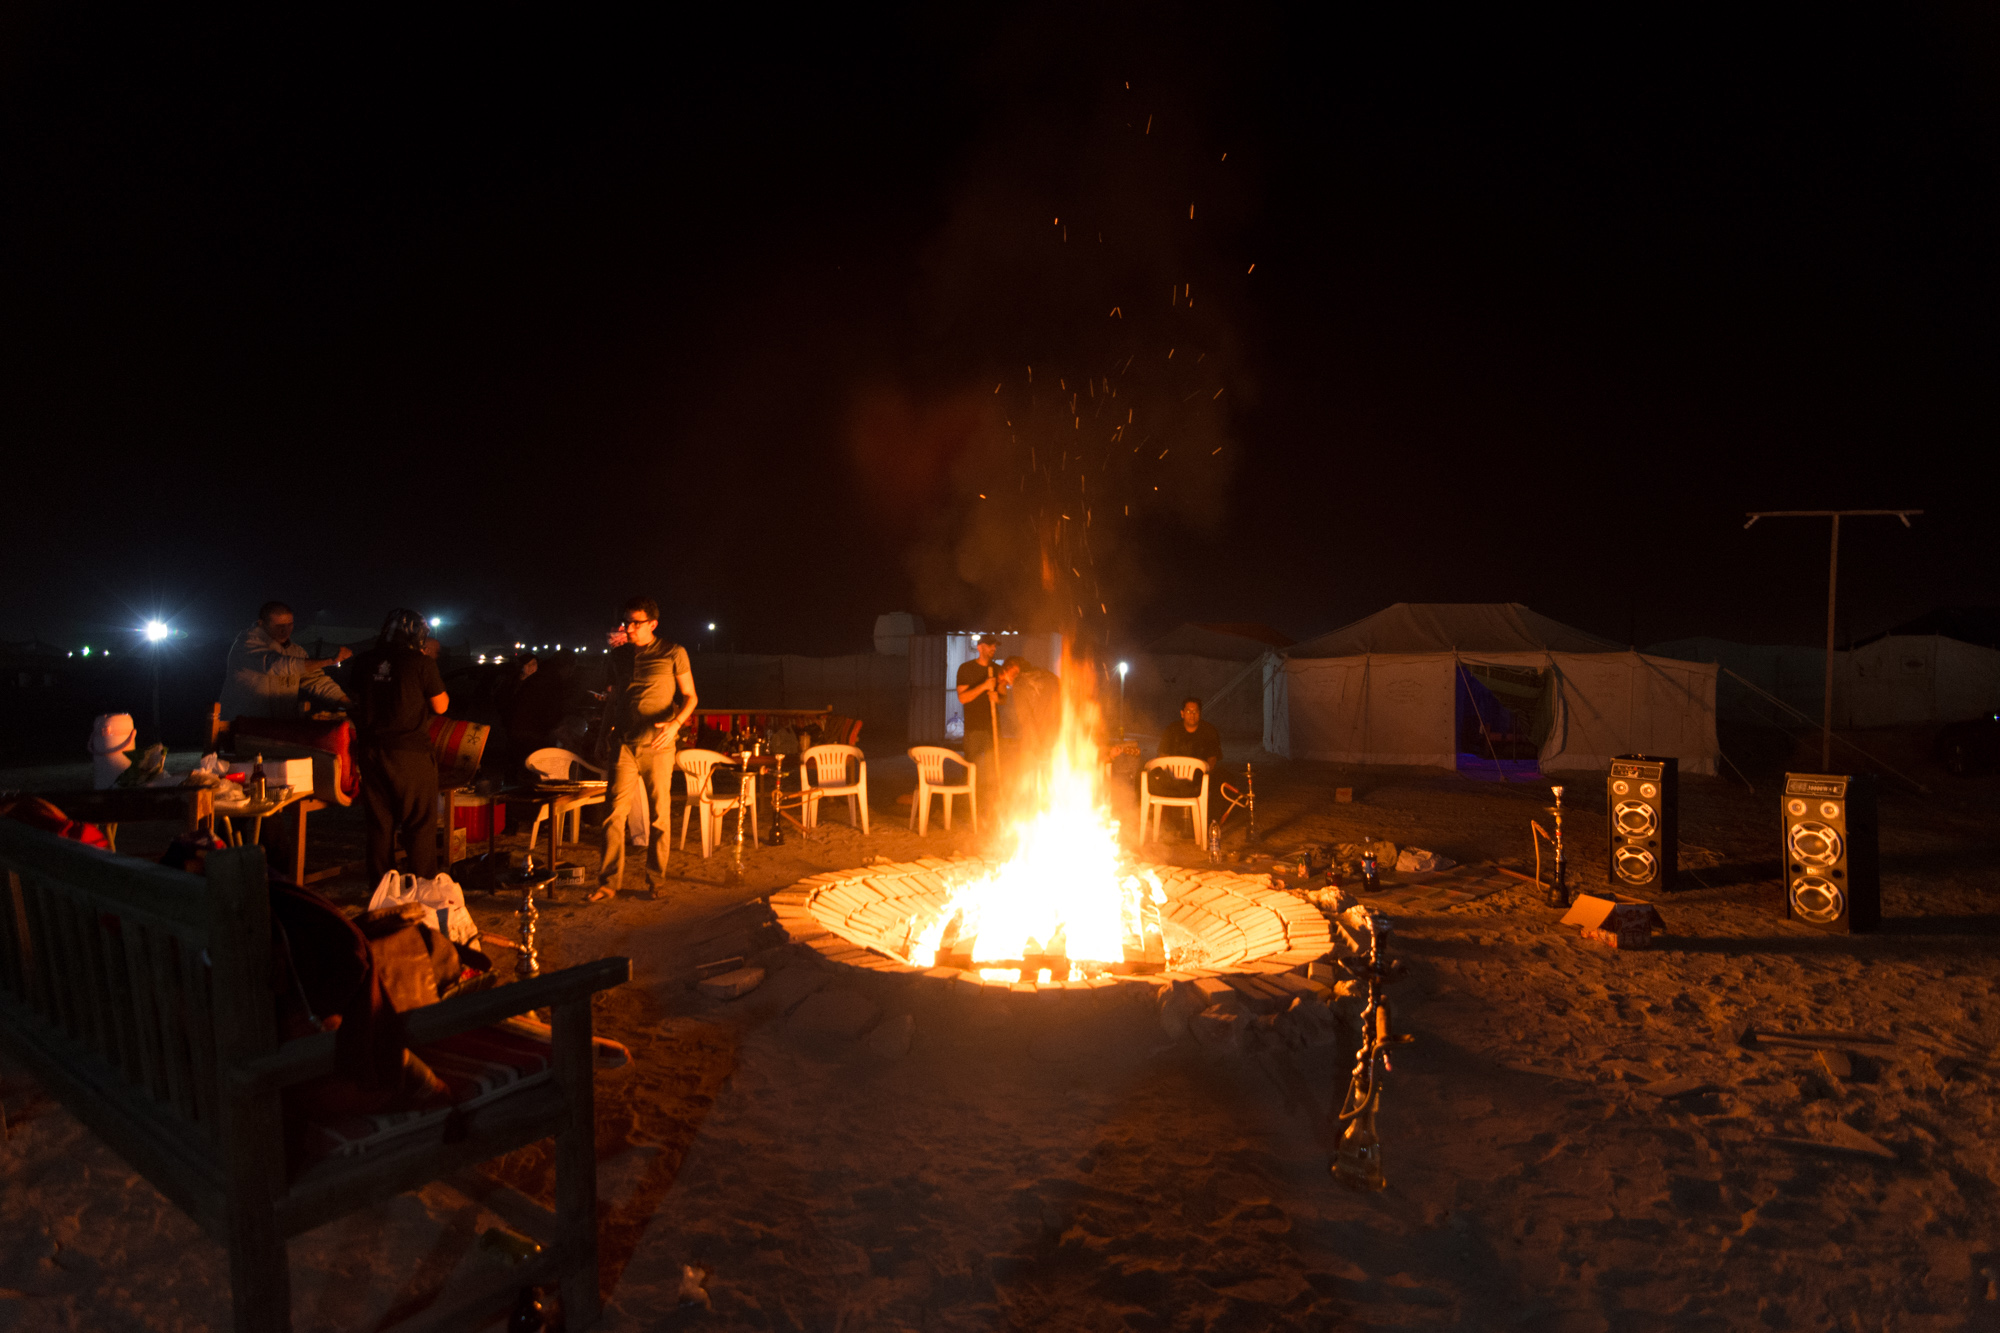 Camping - Bahrain style